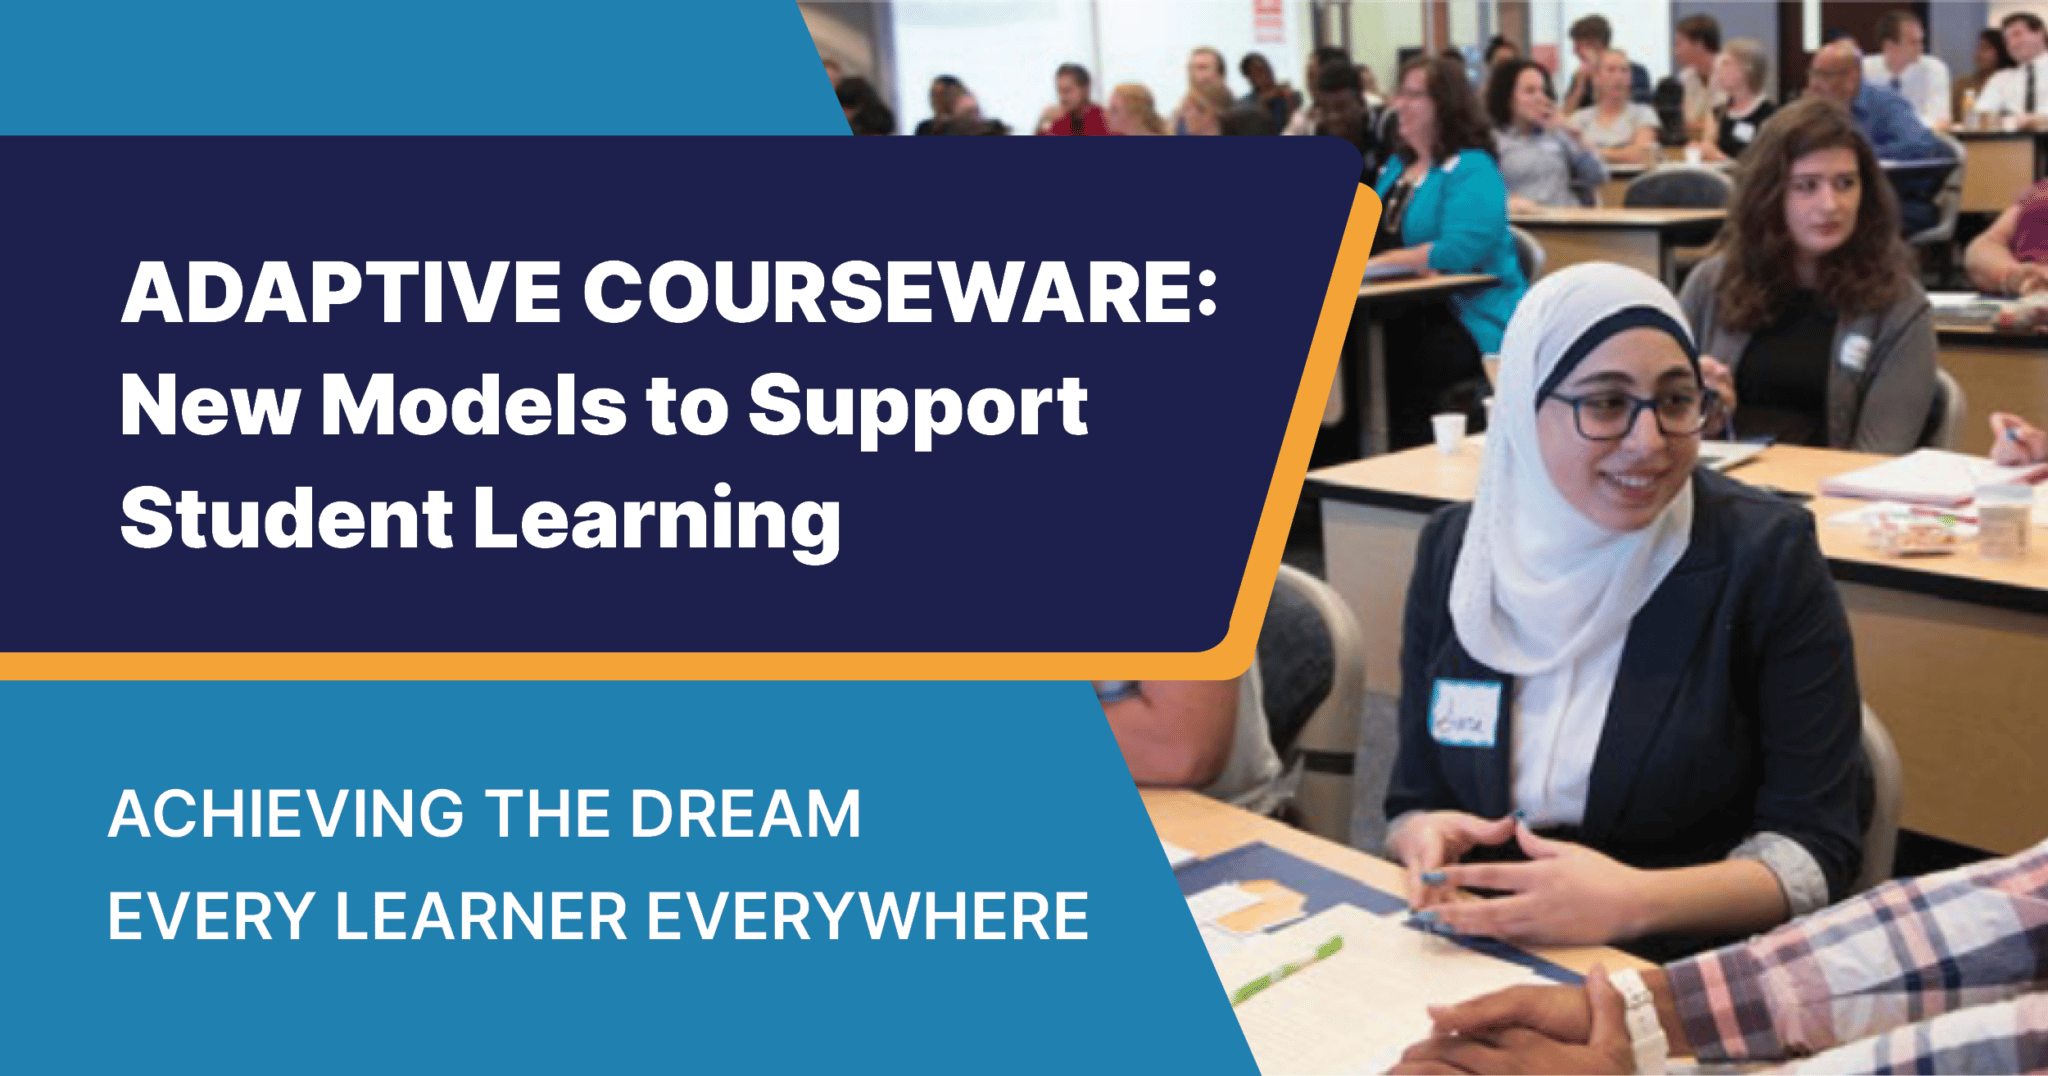 Adaptive courseware: New models to support student learning